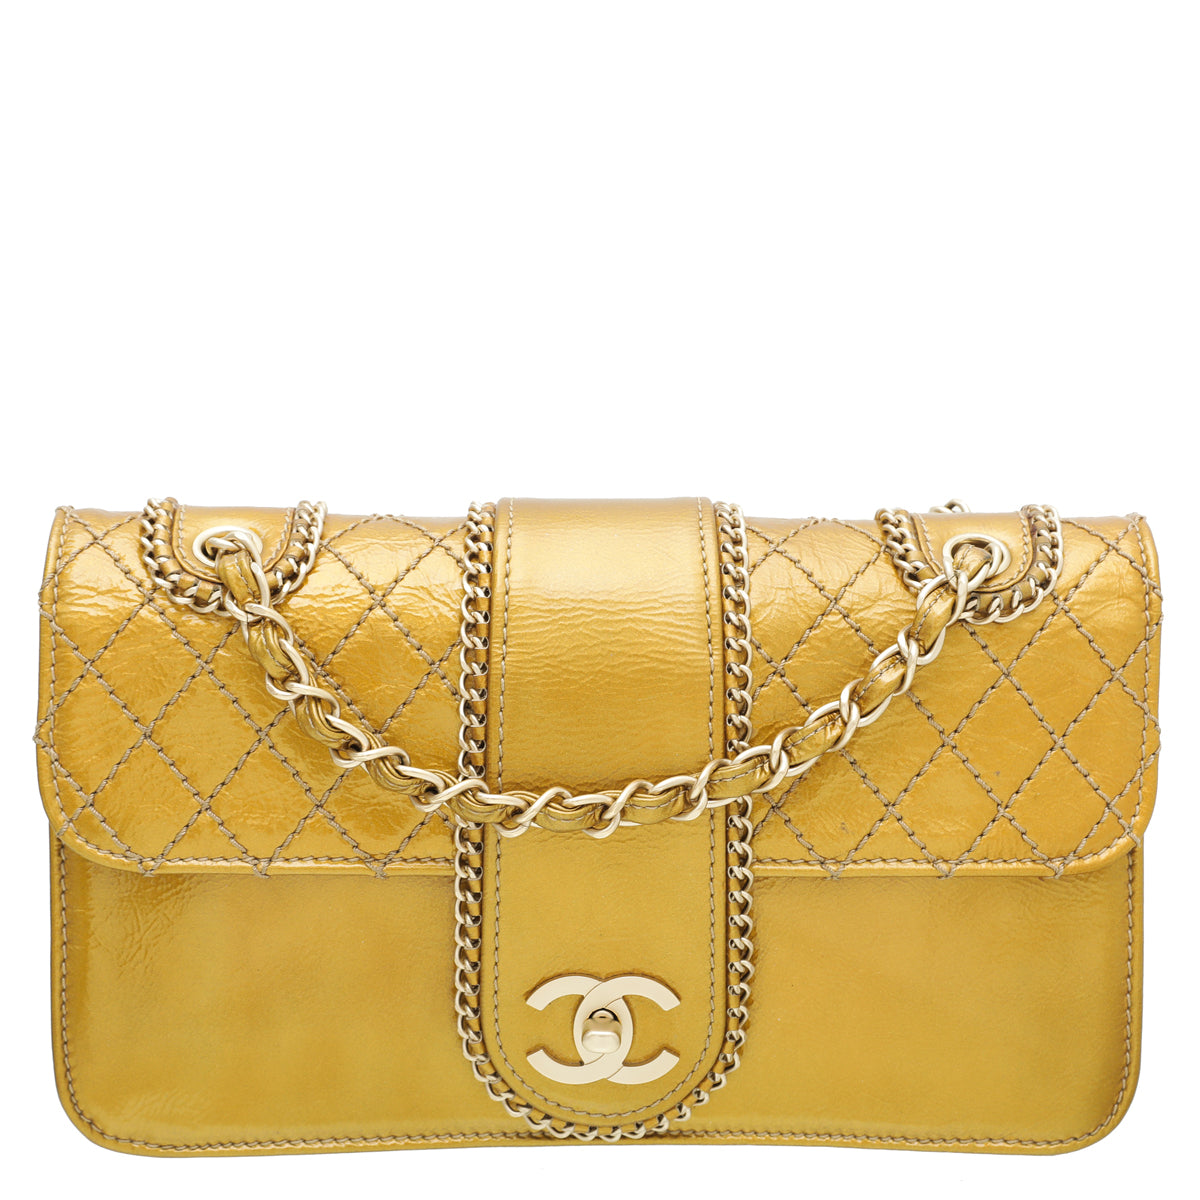 Chanel Gold Quilted Patent Leather Medium Madison Flap Bag Chanel